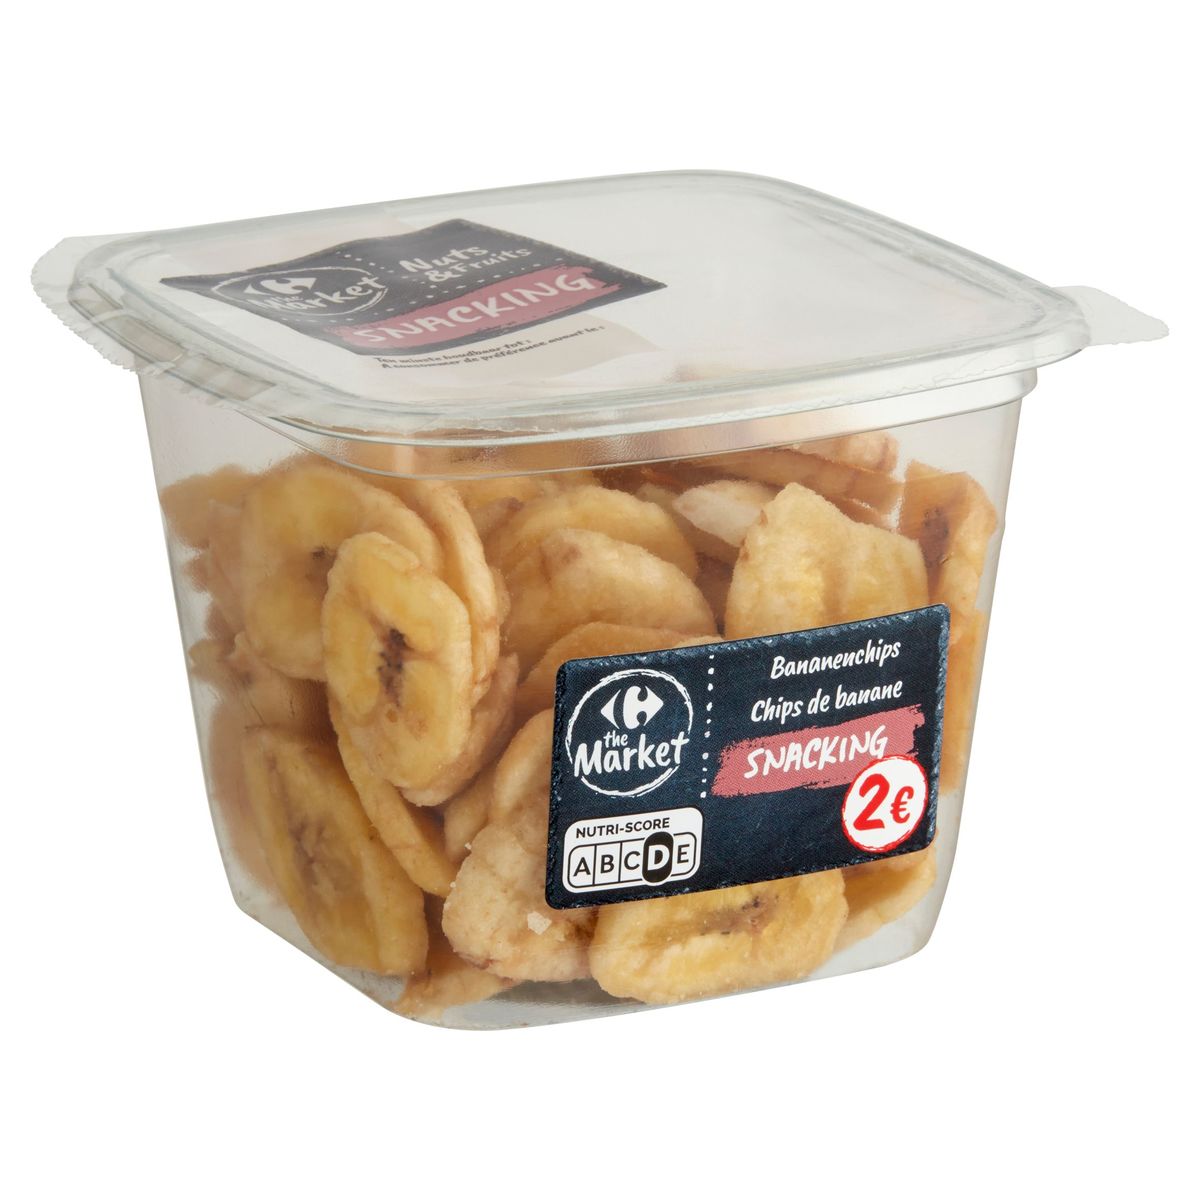 Carrefour The Market Nuts & Fruits Chips de Banane Snacking 110 g